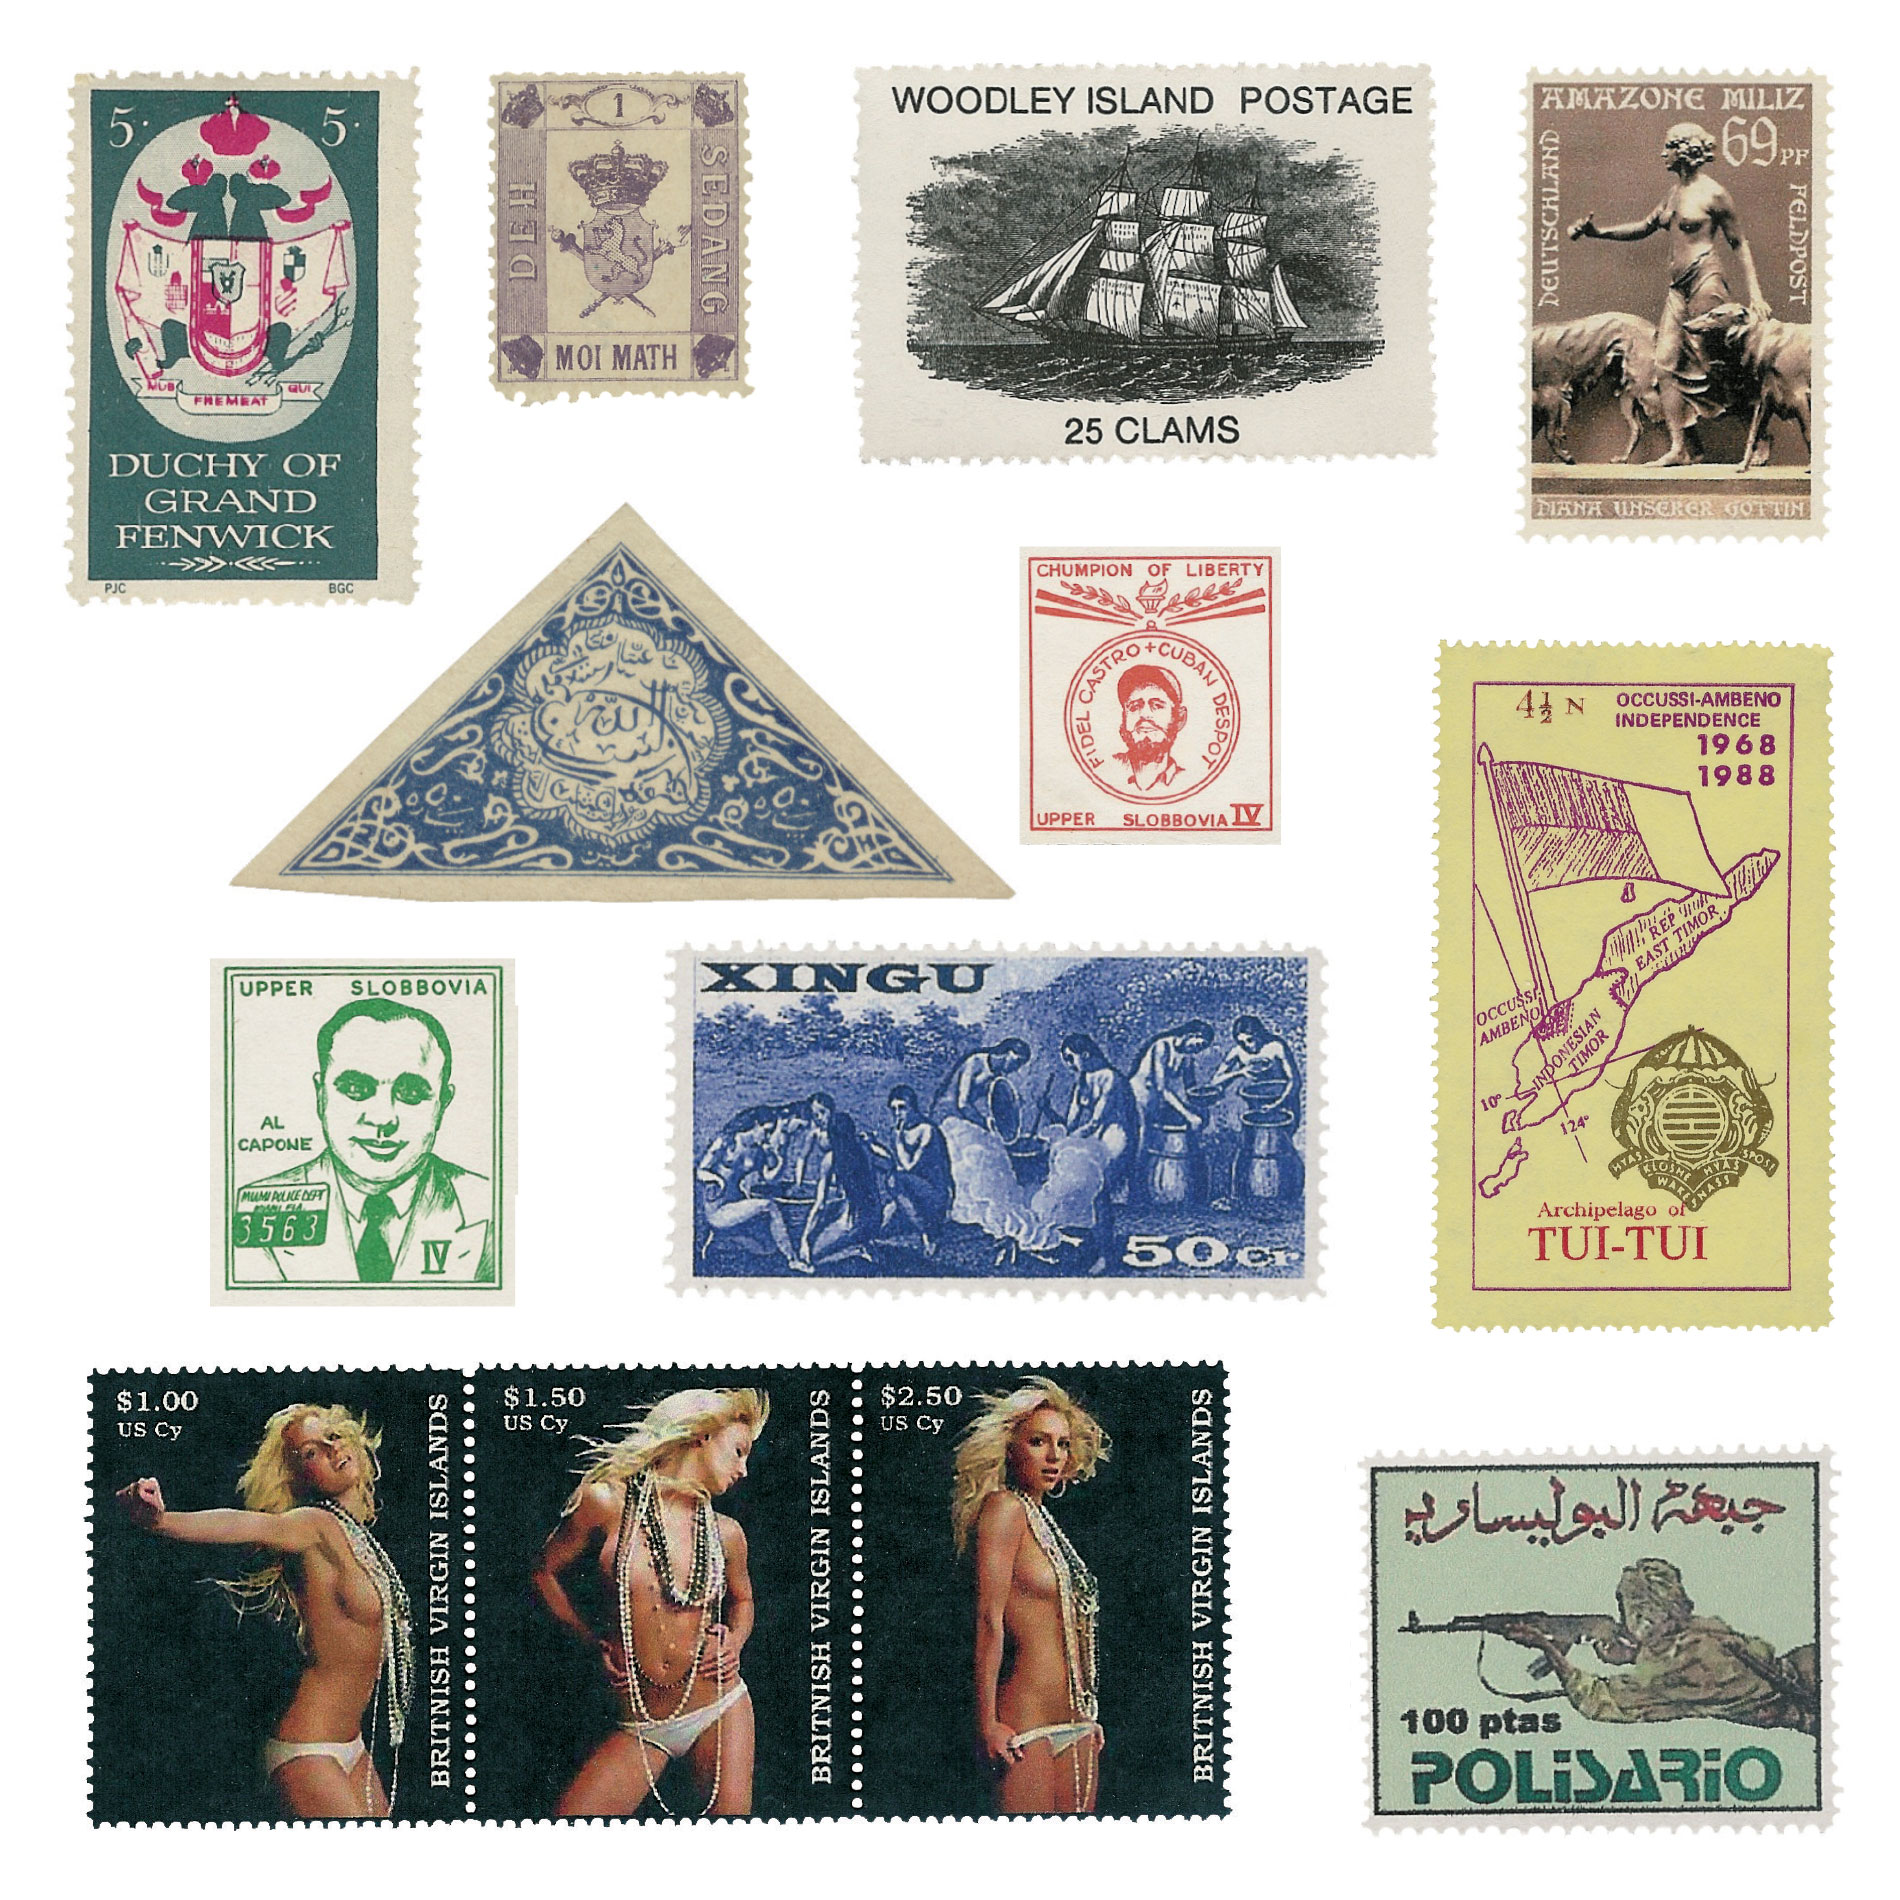 An array of “Cinderella” postage stamps from the authors’ collection.